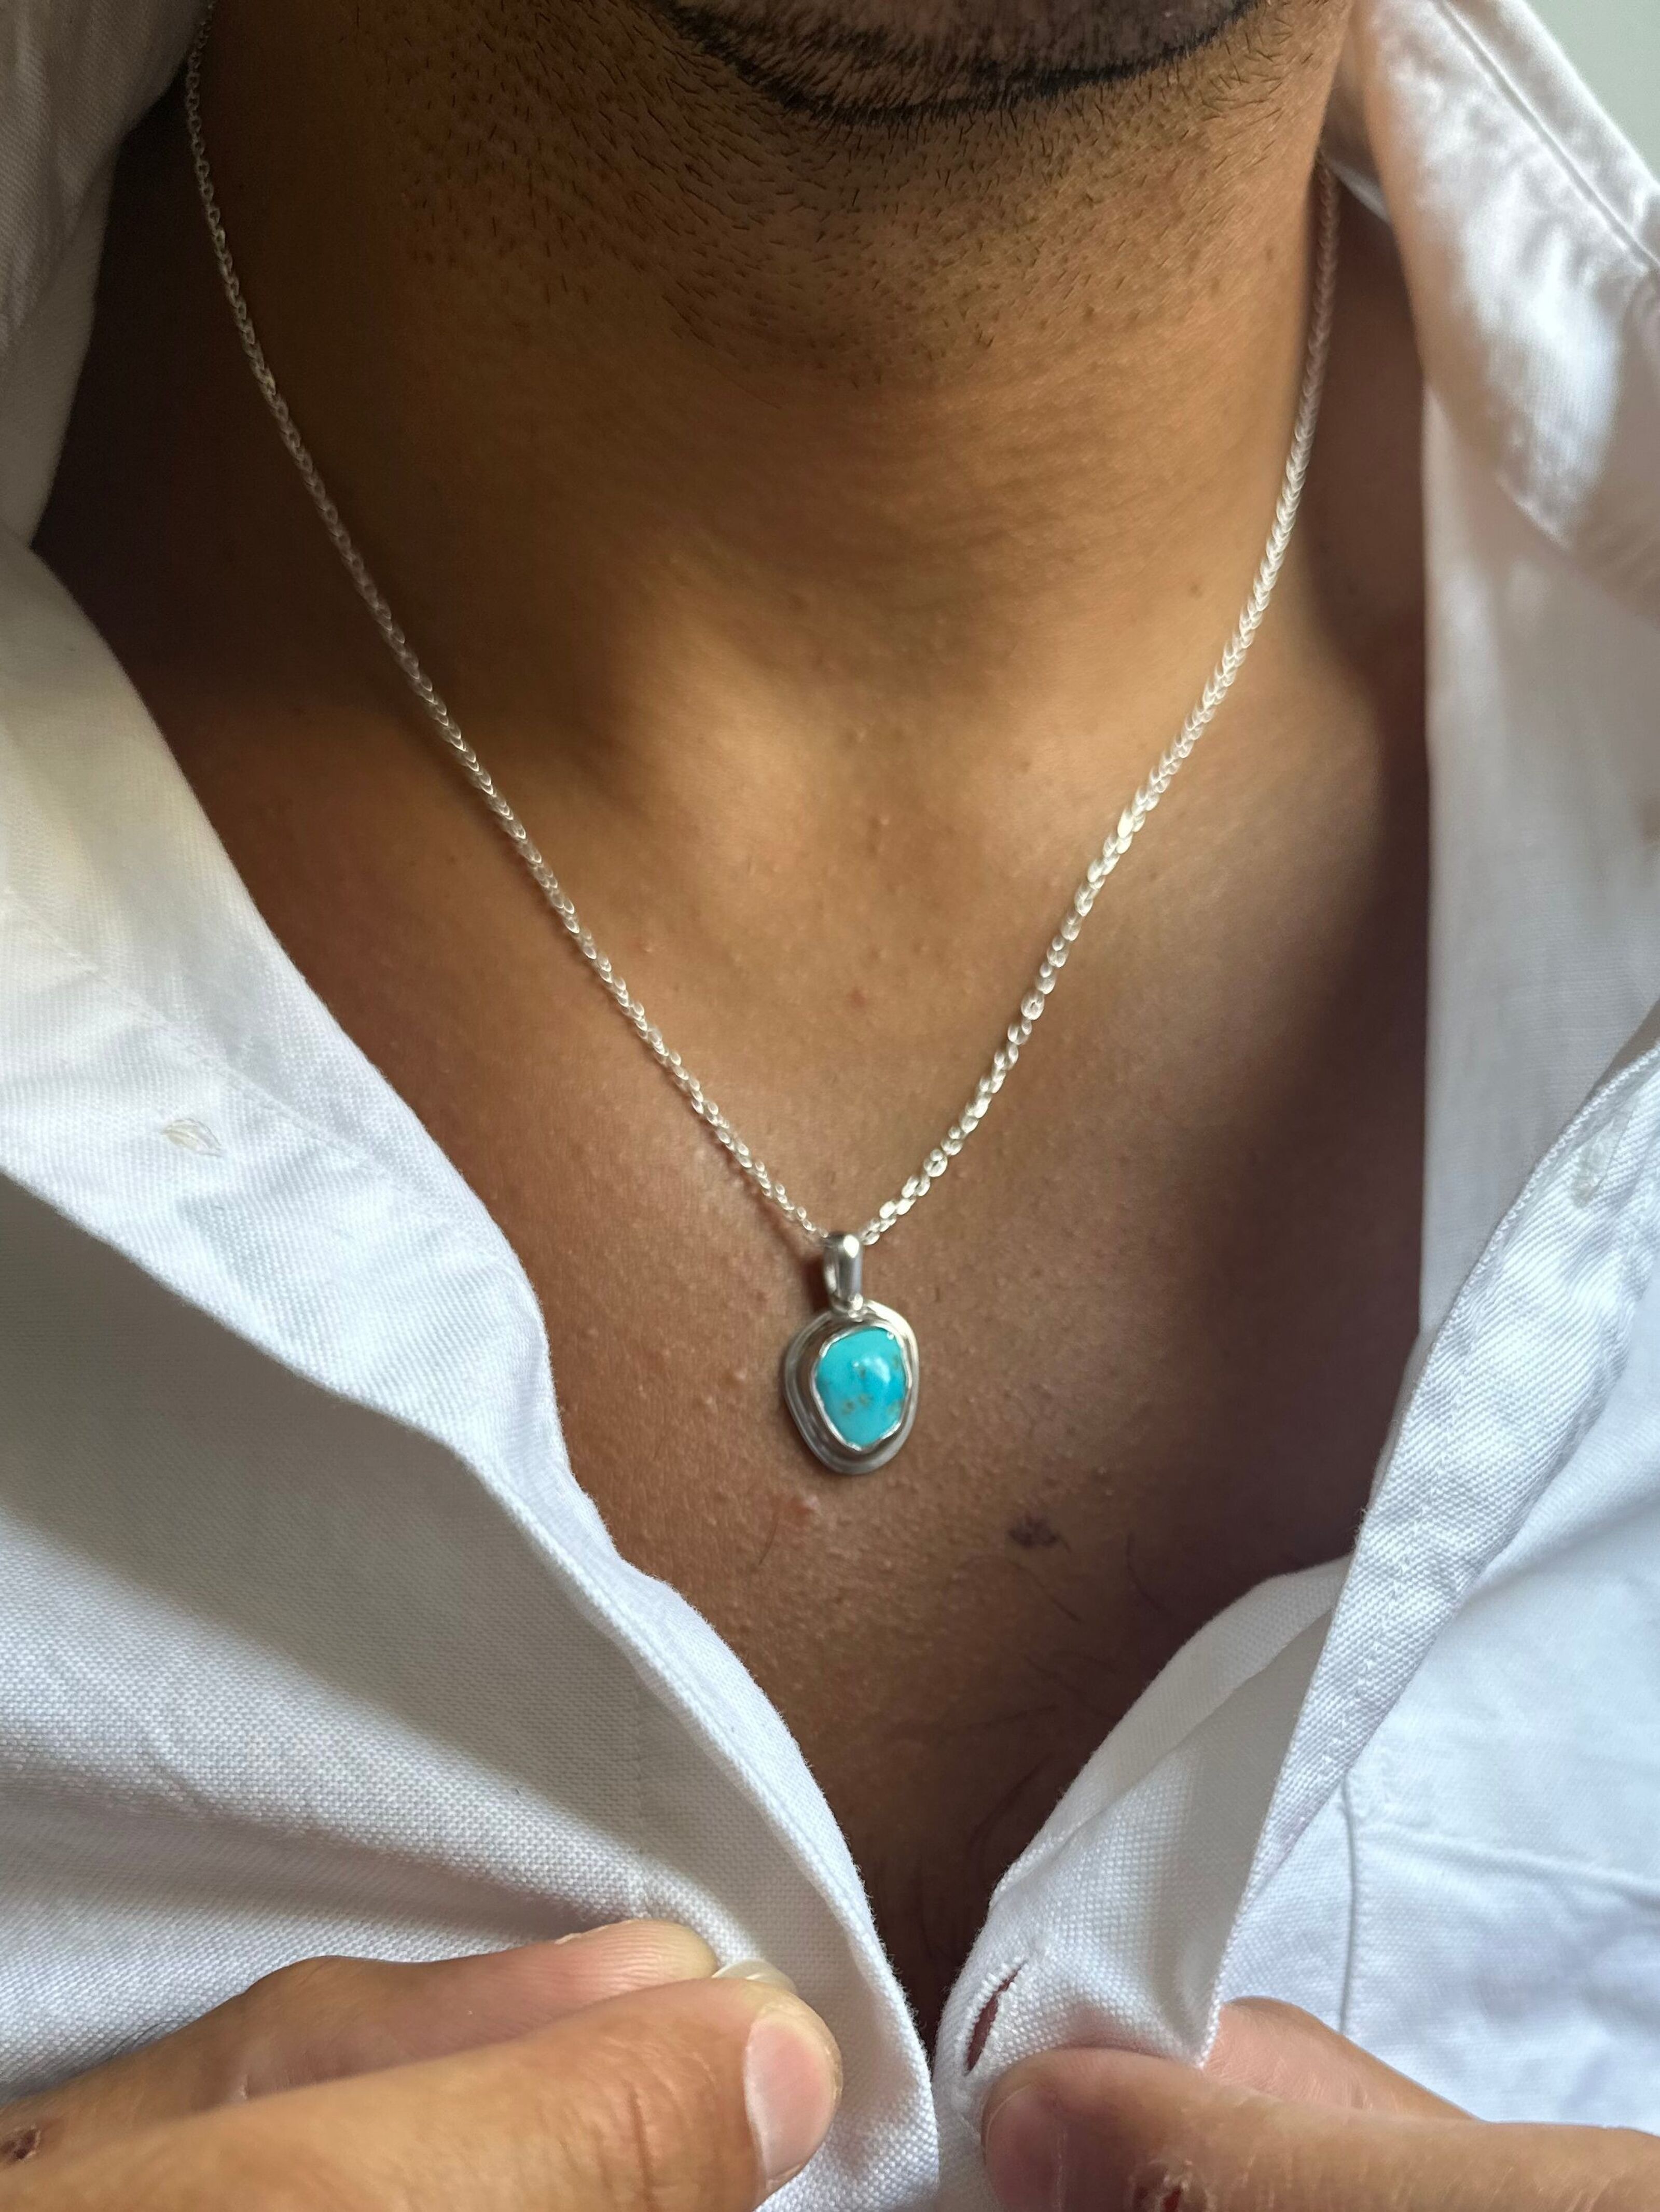 Buy wholesale Real Turquoise Stone Necklace Men, Turquoise Pendant Men,  Silver Chain Necklace, Men\'s Pendant, Made from Sterling SIlver